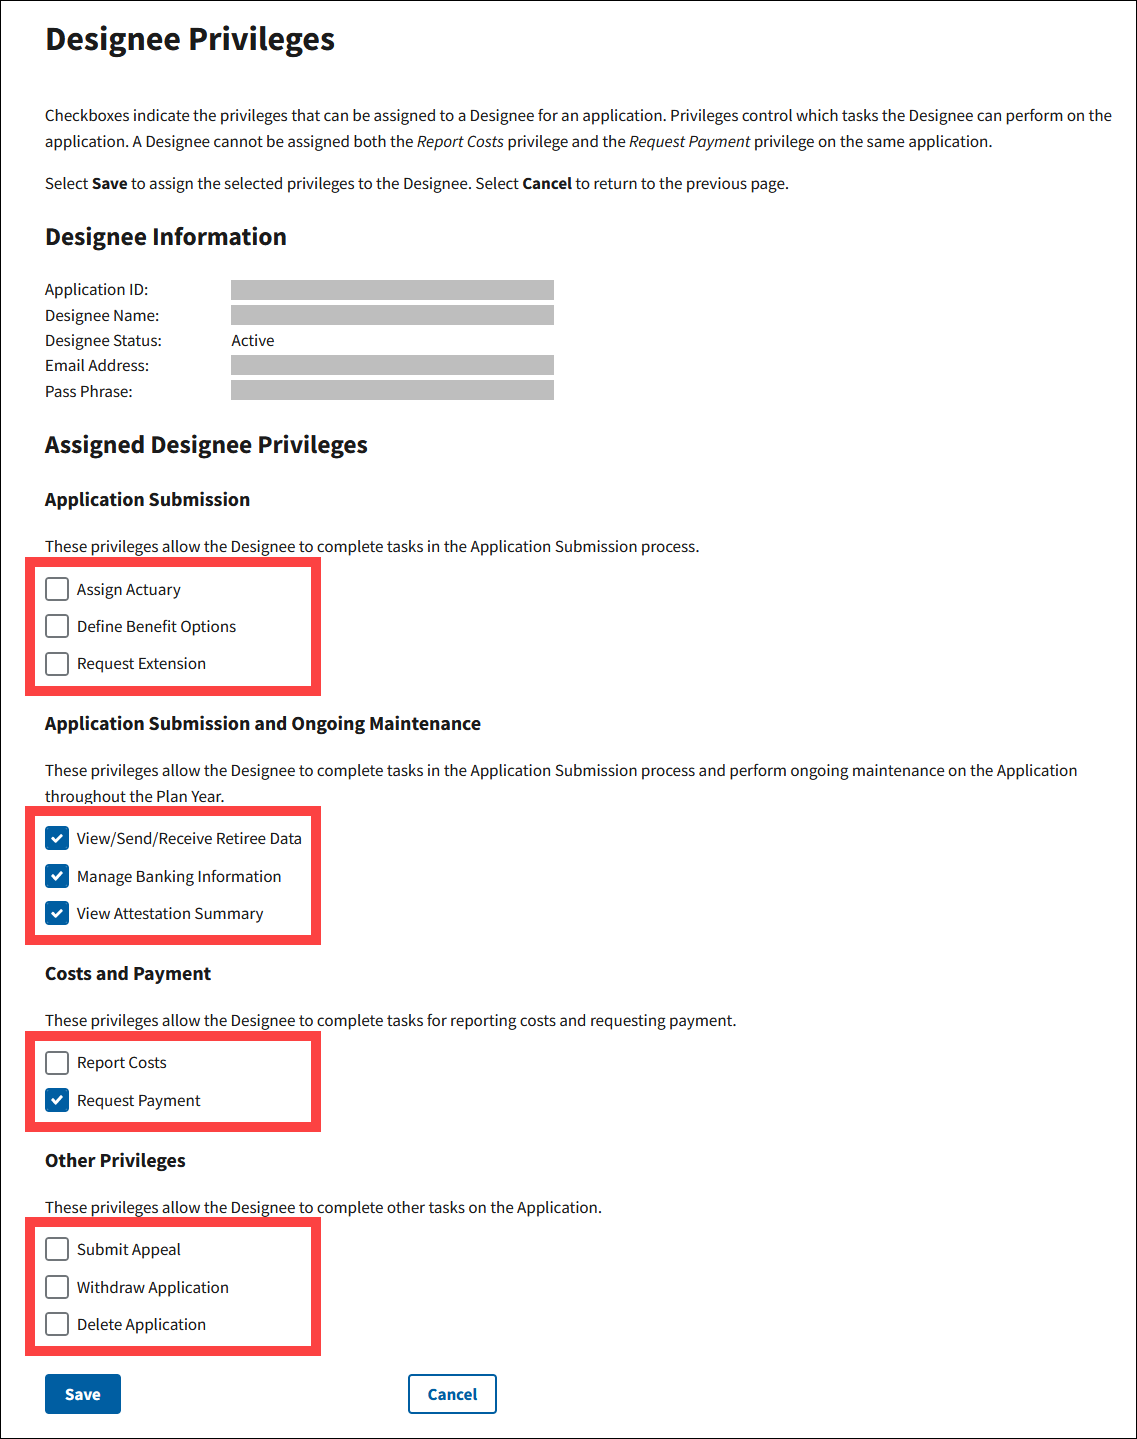 Designee Privileges page with sample data. Checkboxes are highlighted.